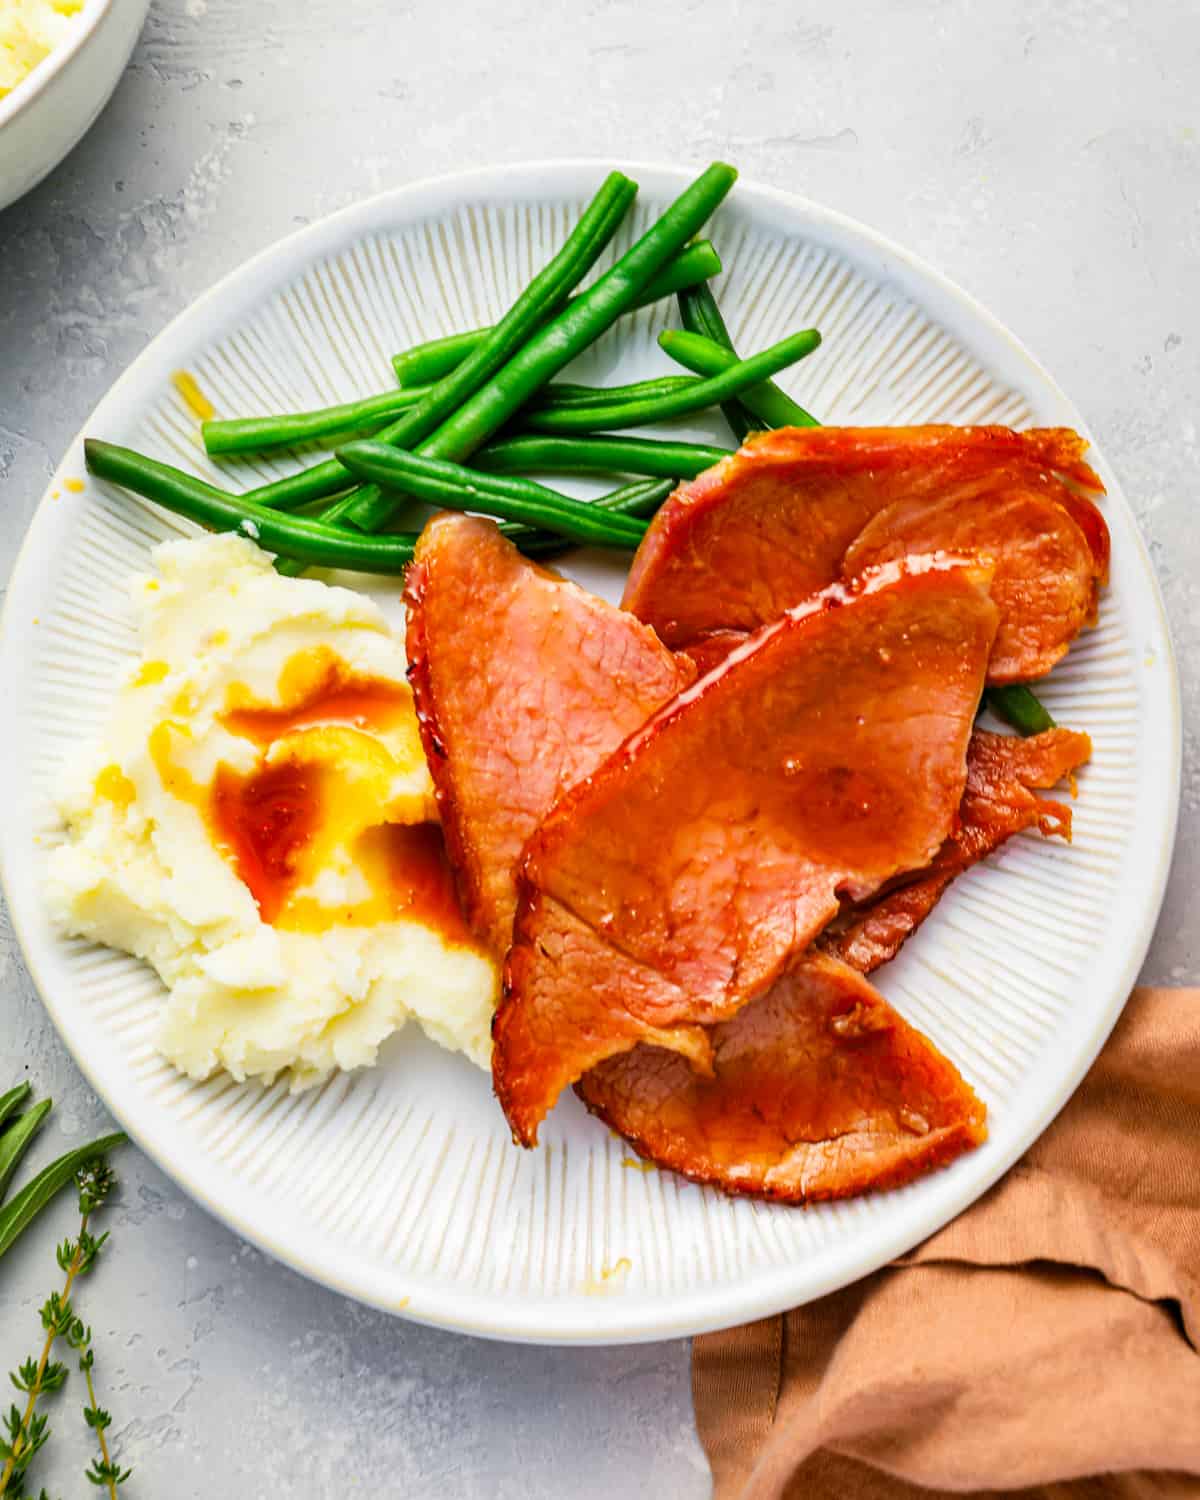 A plate with sliced of glazed ham, green beans and mashed potatoes.